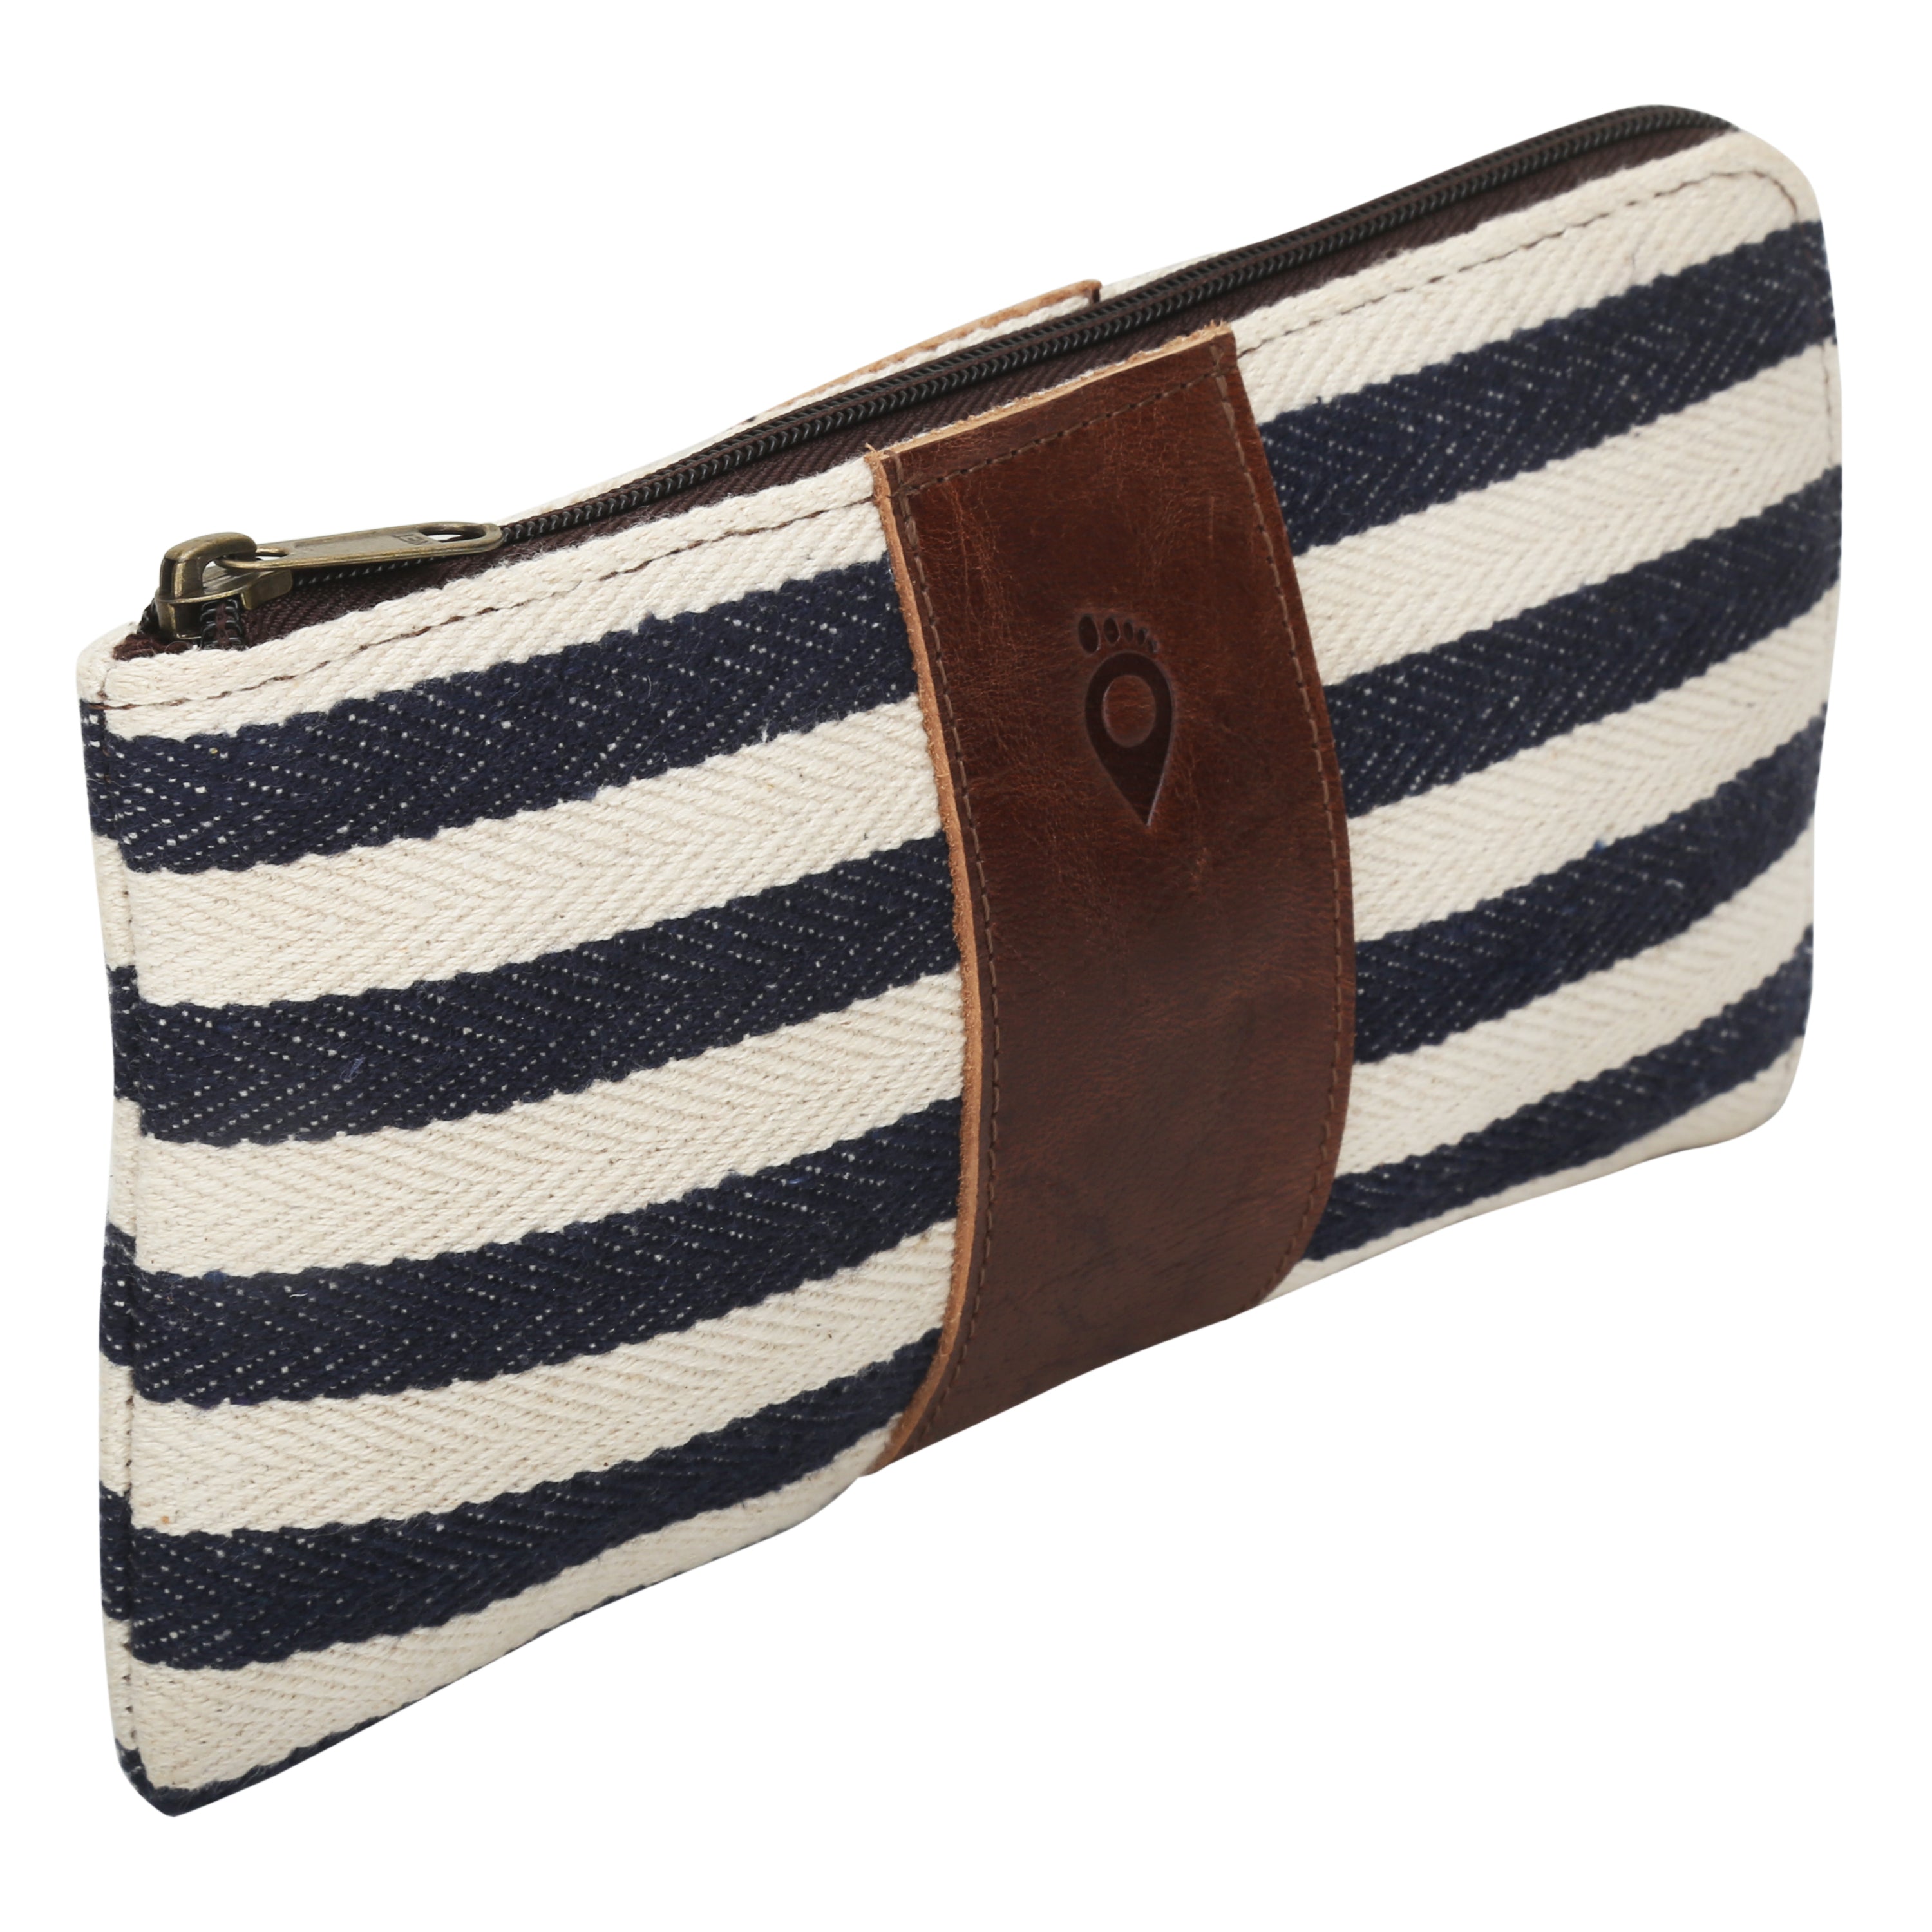 Woven Striped Clutch | Navy Blue and White